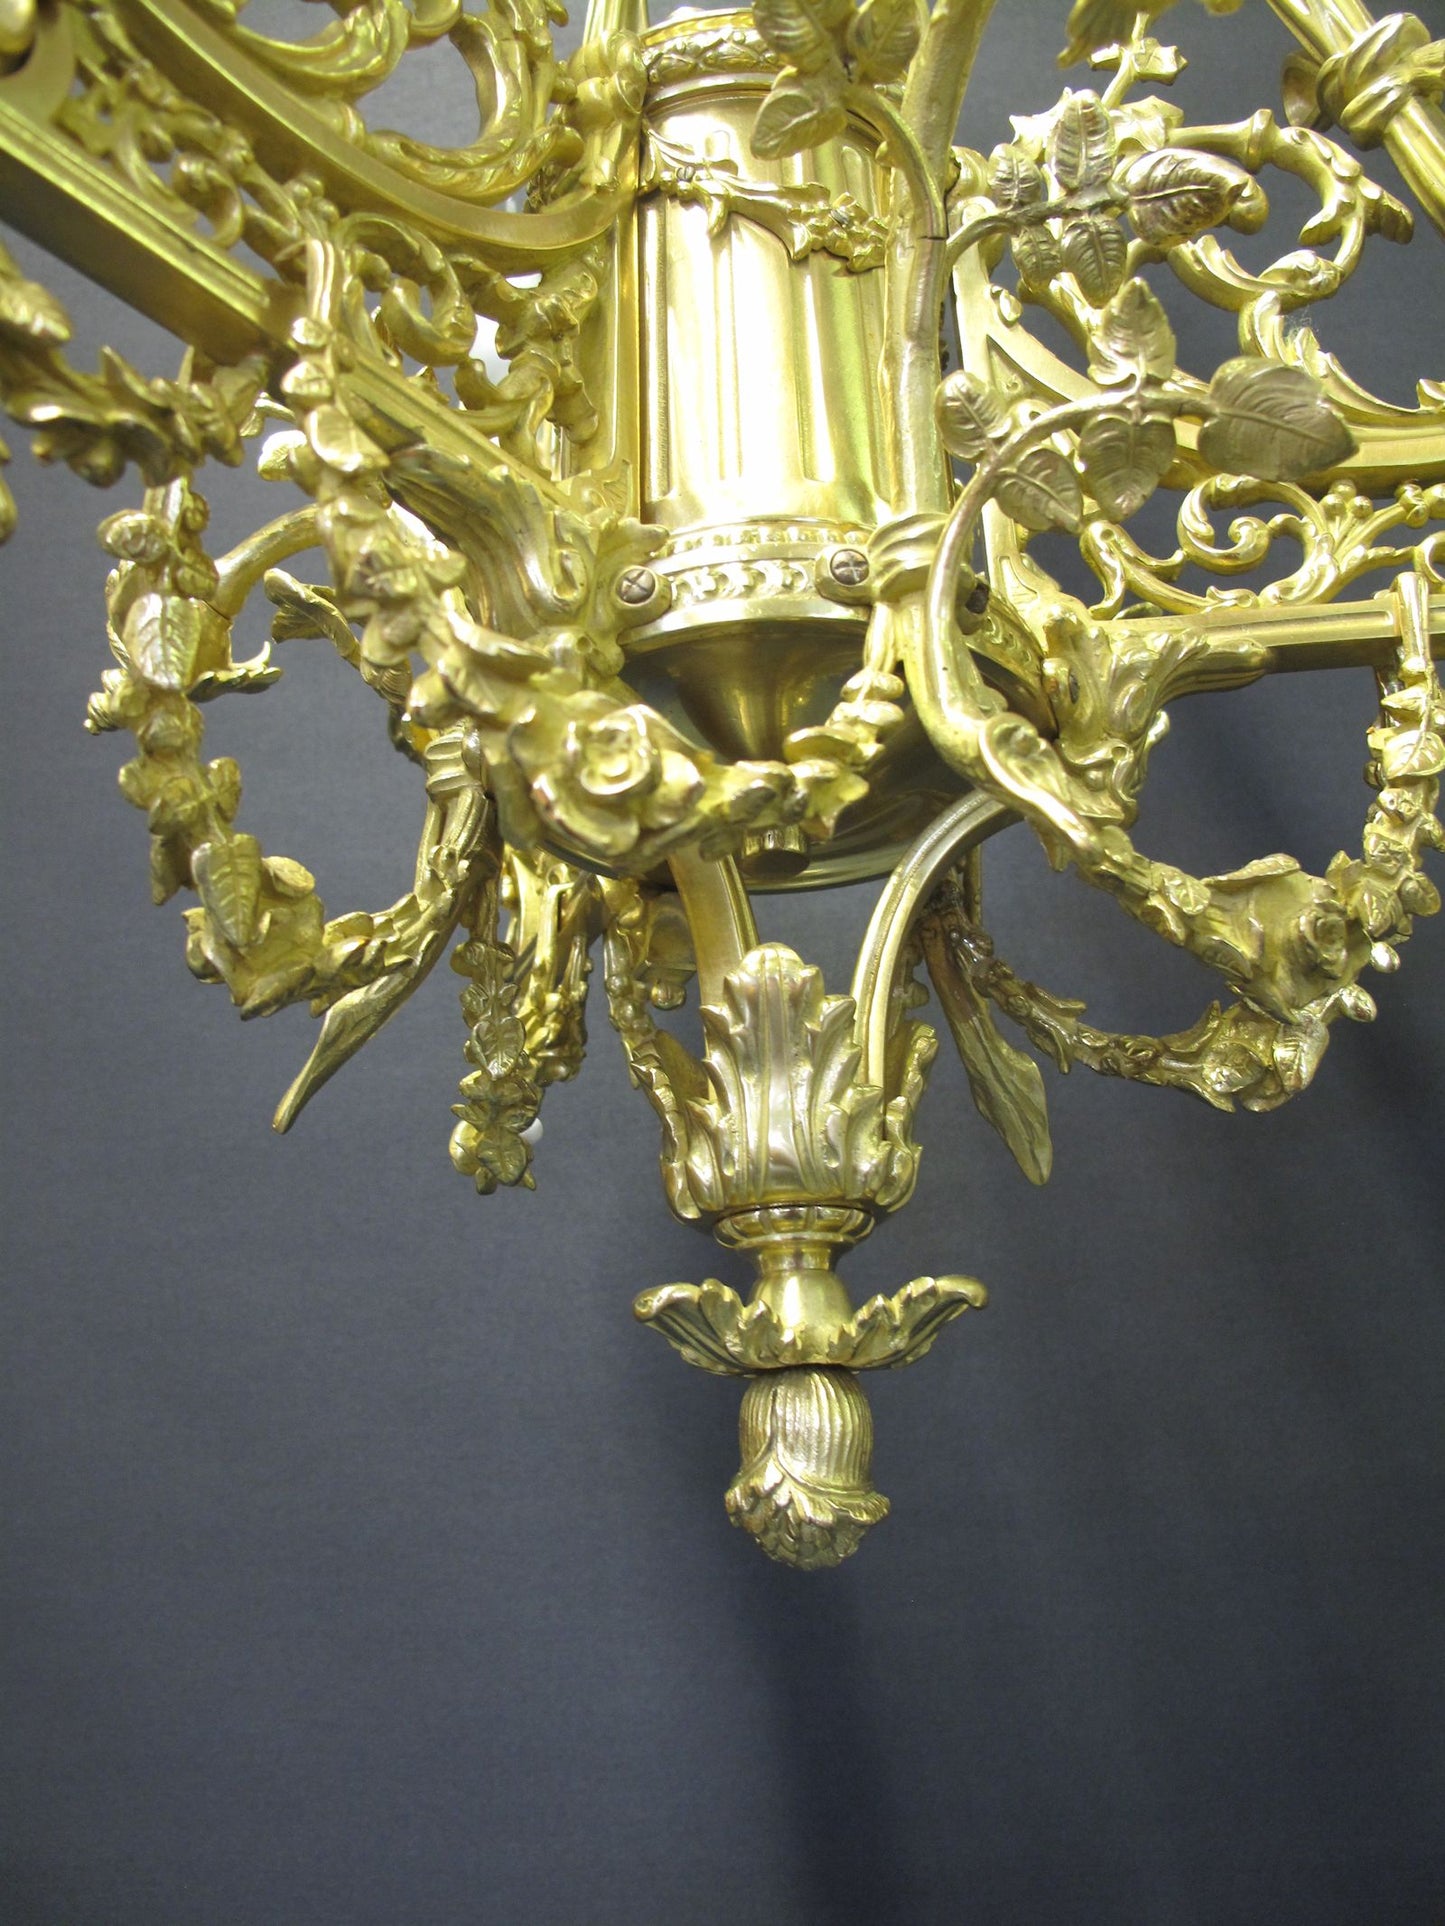 3 arm polished brass chandelier, from underneath